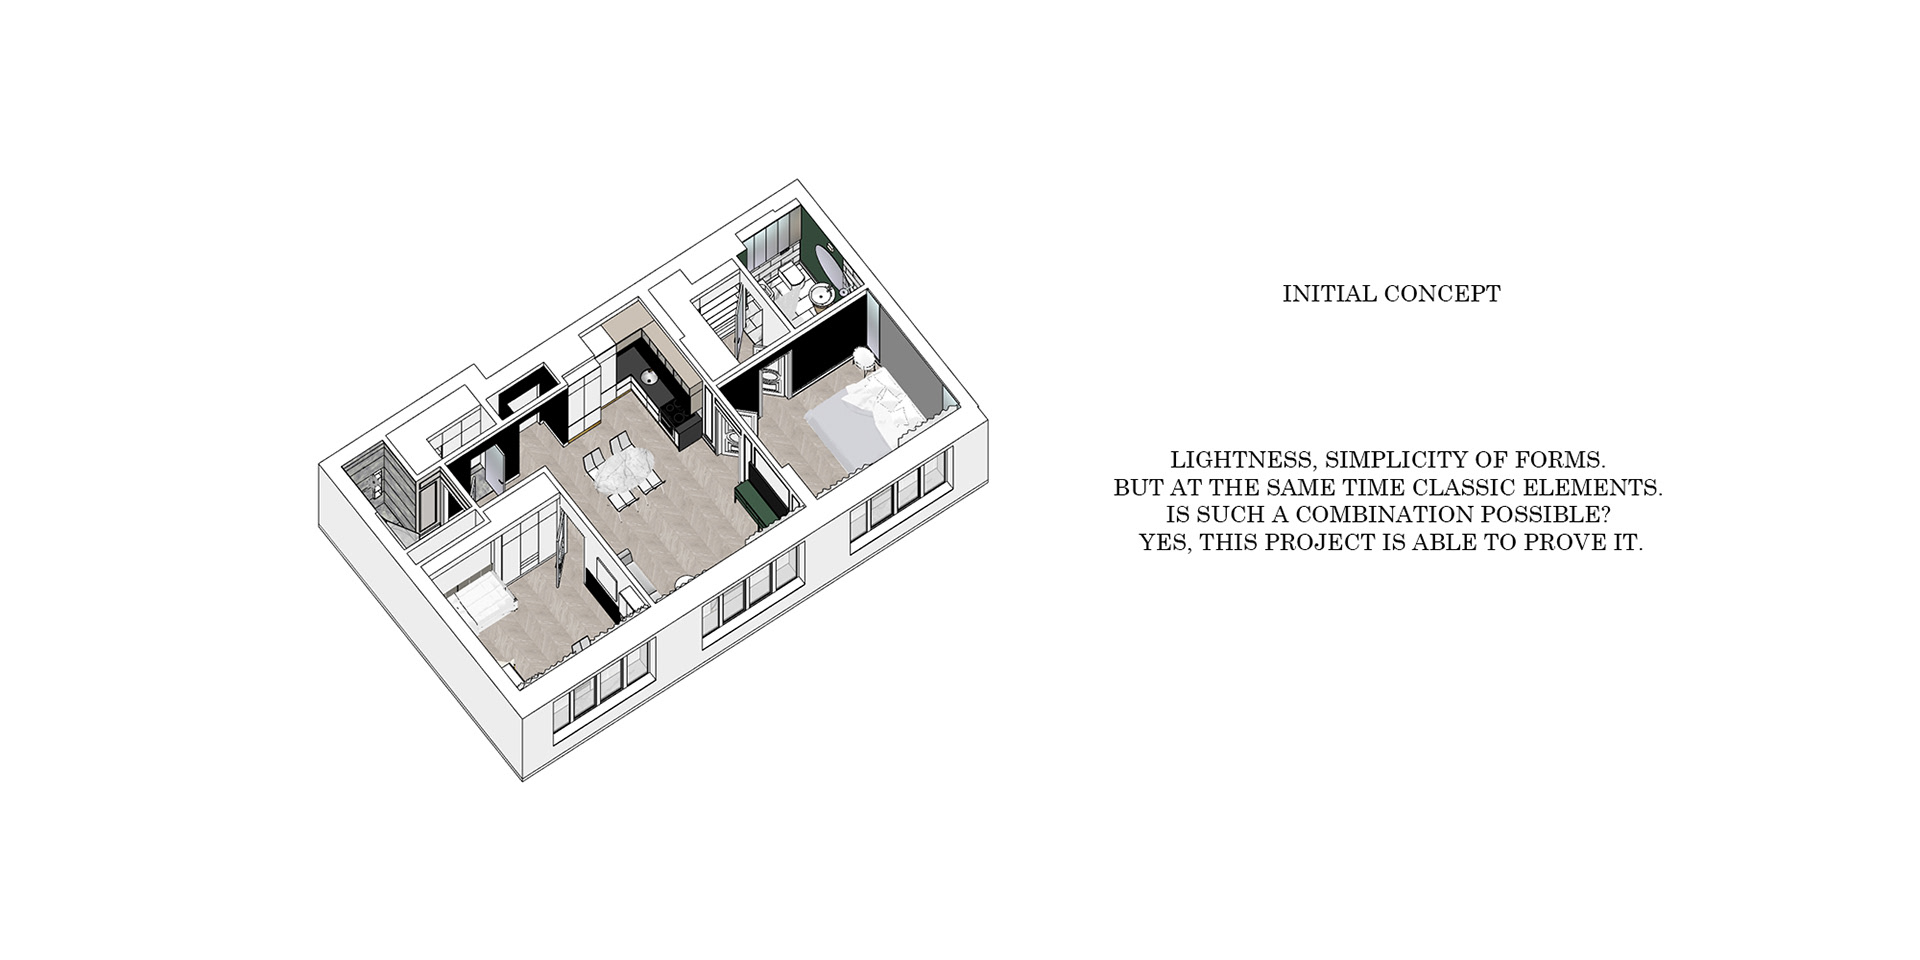 The apartment's overall layout